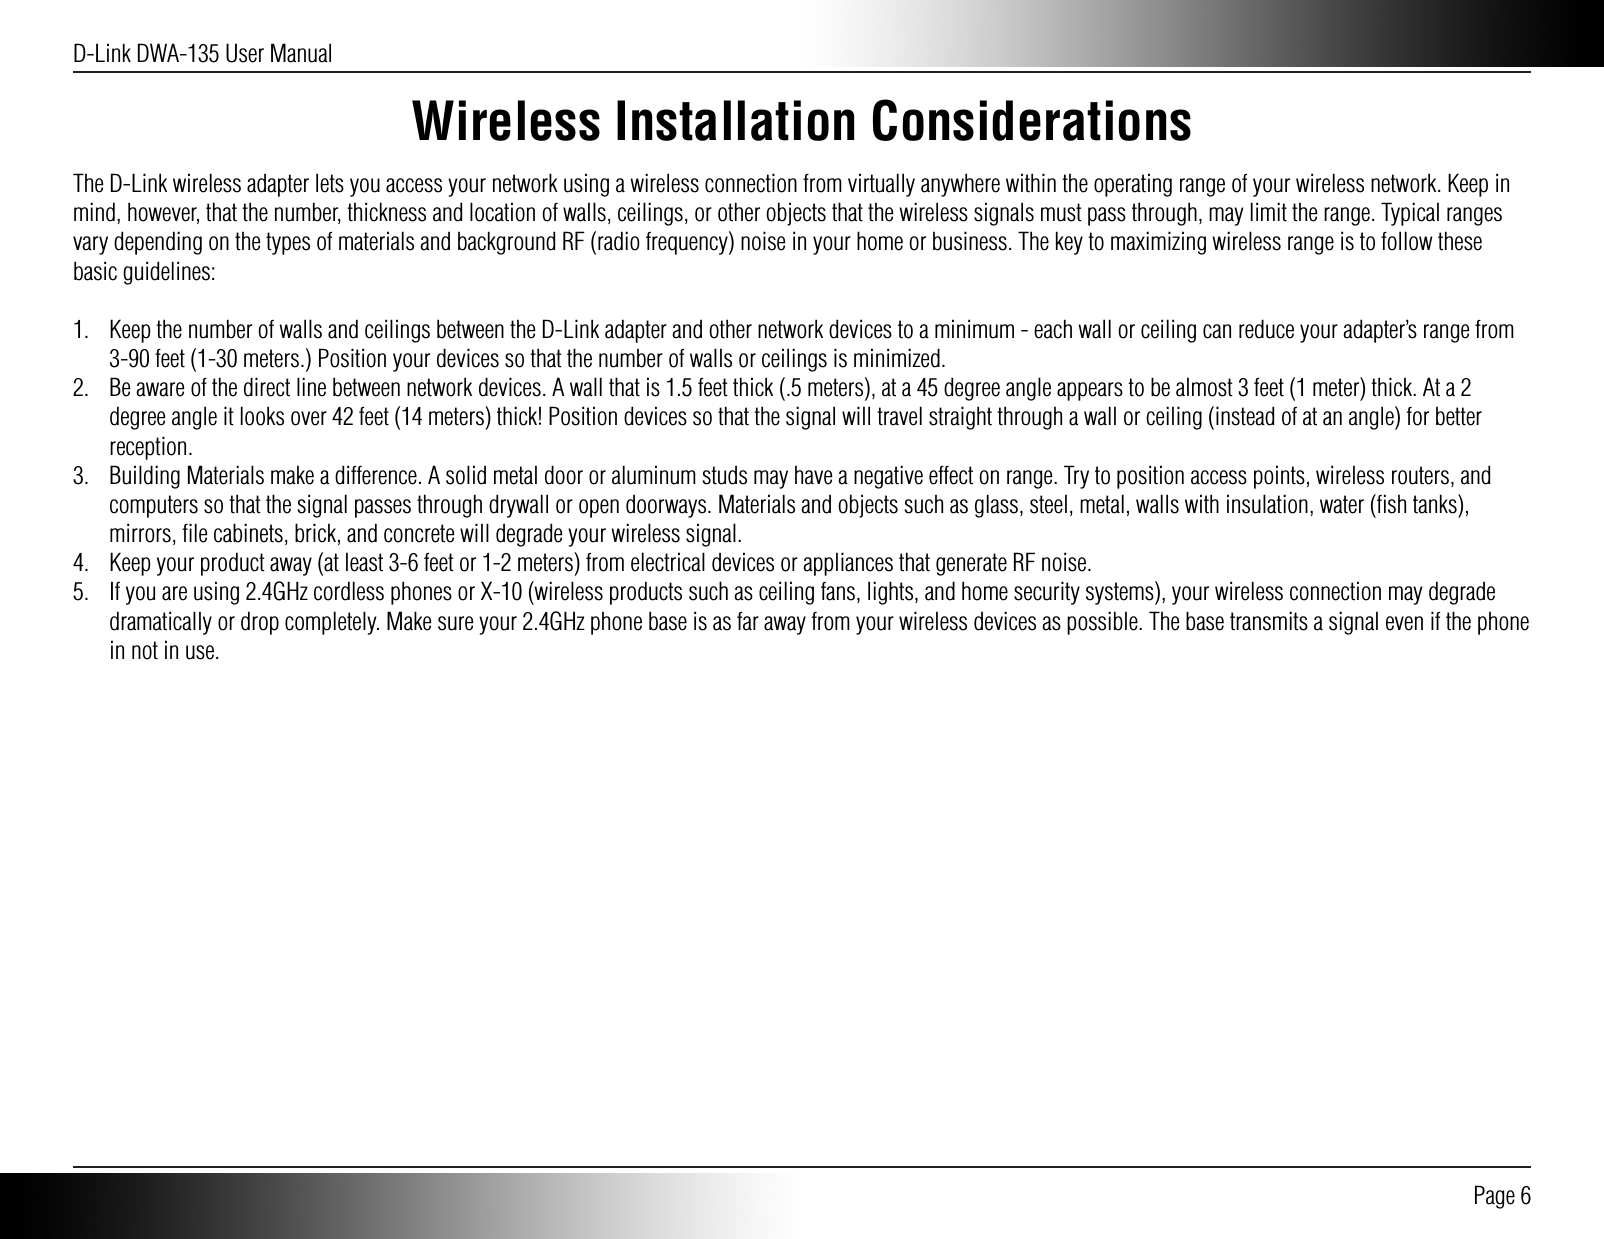 D-Link DWA-135 User Manual Page 6Wireless Installation ConsiderationsThe D-Link wireless adapter lets you access your network using a wireless connection from virtually anywhere within the operating range of your wireless network. Keep in mind, however, that the number, thickness and location of walls, ceilings, or other objects that the wireless signals must pass through, may limit the range. Typical ranges vary depending on the types of materials and background RF (radio frequency) noise in your home or business. The key to maximizing wireless range is to follow these basic guidelines:1.  Keep the number of walls and ceilings between the D-Link adapter and other network devices to a minimum - each wall or ceiling can reduce your adapter’s range from 3-90 feet (1-30 meters.) Position your devices so that the number of walls or ceilings is minimized.2.  Be aware of the direct line between network devices. A wall that is 1.5 feet thick (.5 meters), at a 45 degree angle appears to be almost 3 feet (1 meter) thick. At a 2 degree angle it looks over 42 feet (14 meters) thick! Position devices so that the signal will travel straight through a wall or ceiling (instead of at an angle) for better reception.3.  Building Materials make a difference. A solid metal door or aluminum studs may have a negative effect on range. Try to position access points, wireless routers, and computers so that the signal passes through drywall or open doorways. Materials and objects such as glass, steel, metal, walls with insulation, water (ﬁsh tanks), mirrors, ﬁle cabinets, brick, and concrete will degrade your wireless signal.4.  Keep your product away (at least 3-6 feet or 1-2 meters) from electrical devices or appliances that generate RF noise.5.  If you are using 2.4GHz cordless phones or X-10 (wireless products such as ceiling fans, lights, and home security systems), your wireless connection may degrade dramatically or drop completely. Make sure your 2.4GHz phone base is as far away from your wireless devices as possible. The base transmits a signal even if the phone in not in use.